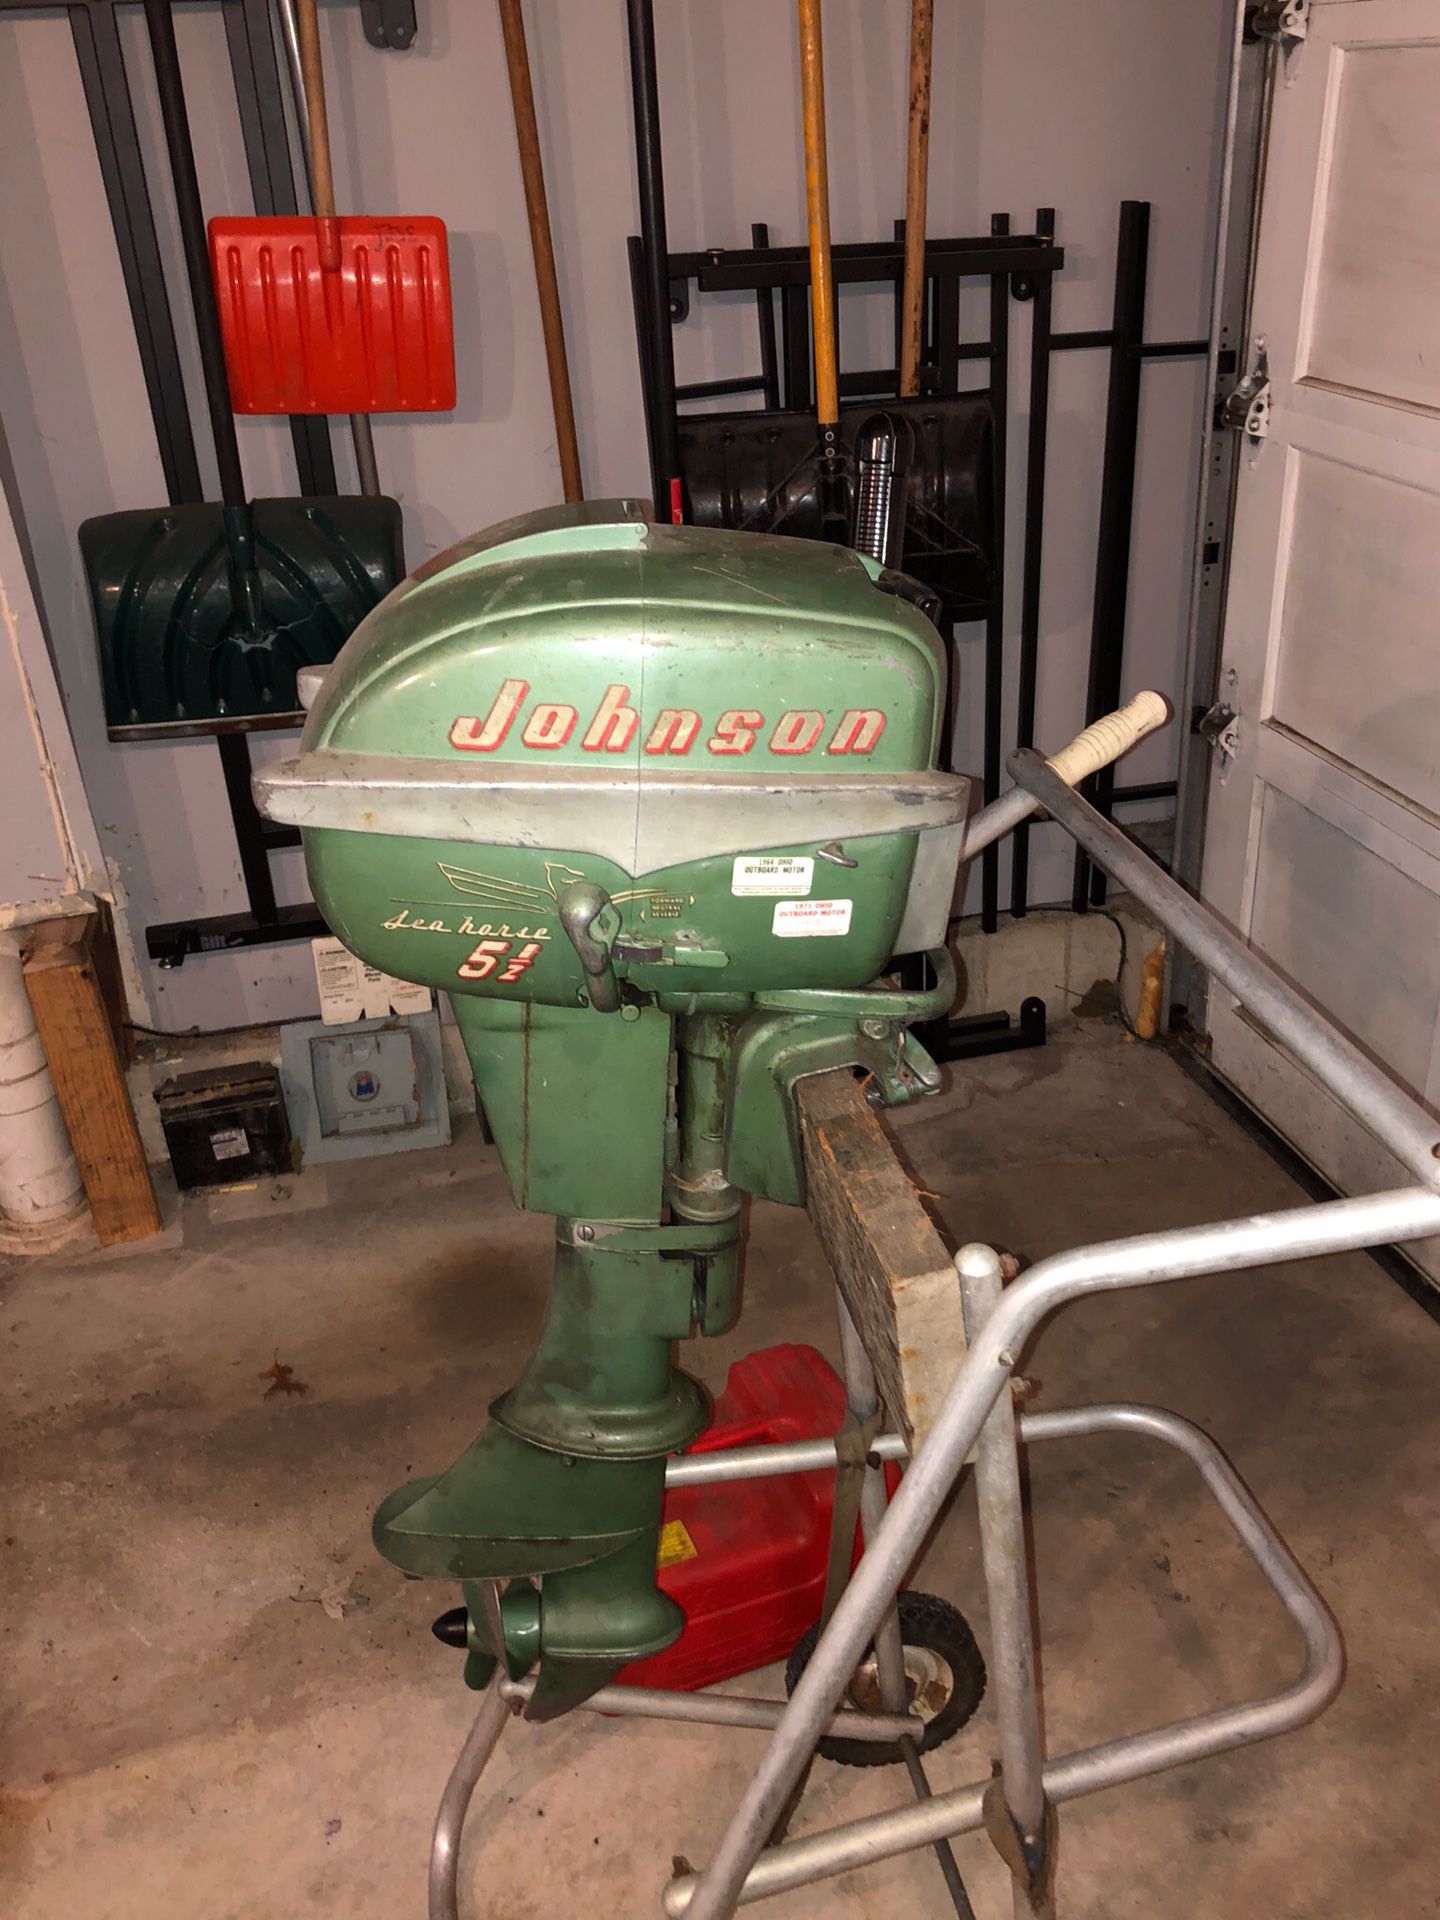 Antique Johnson seahorse 5 1/2 hp outboard engine